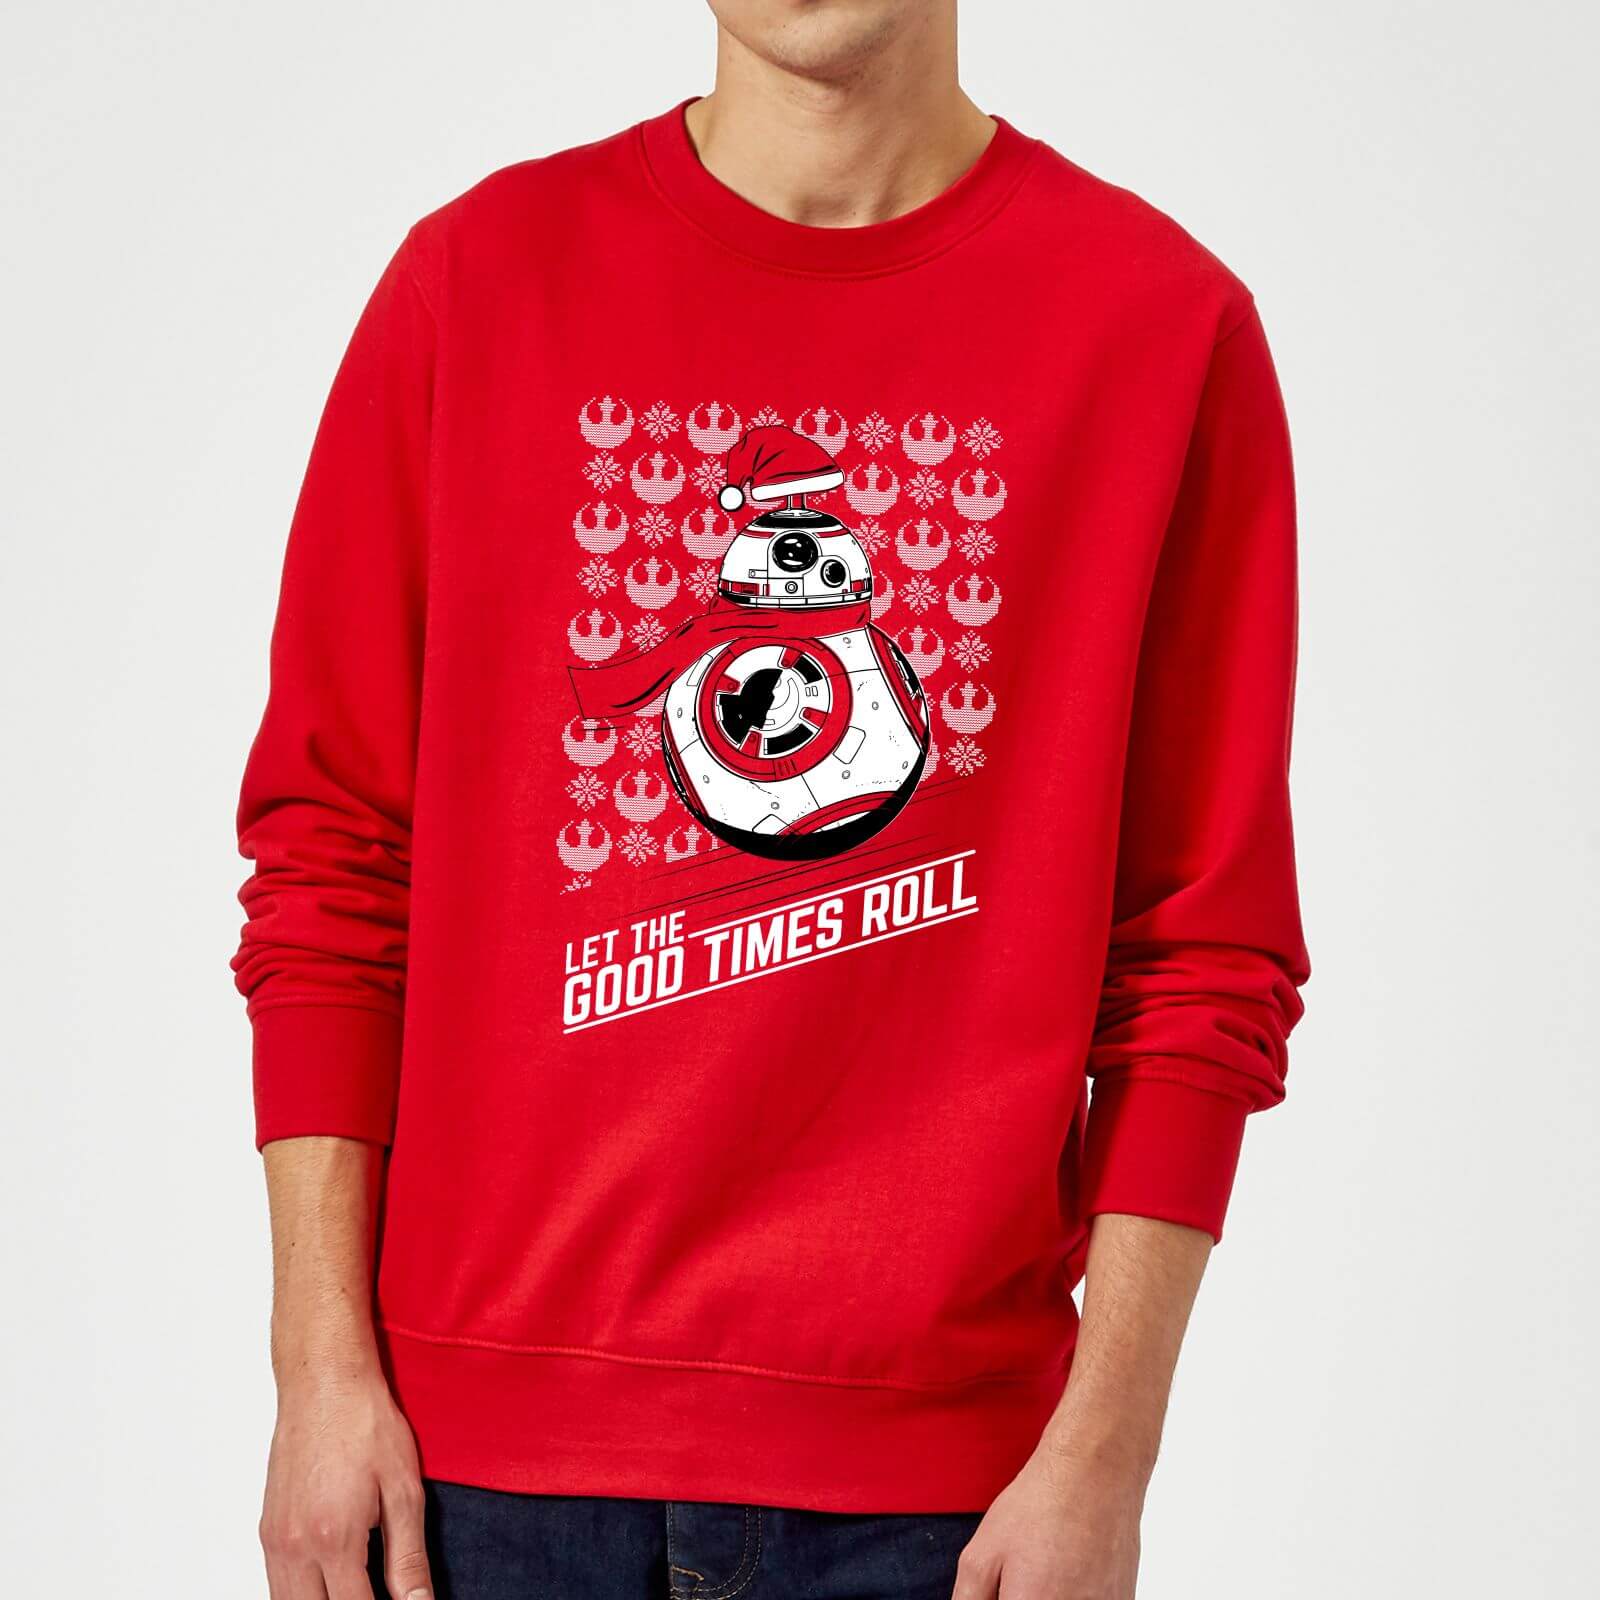 Star Wars Let The Good Times Roll Christmas Sweatshirt - Red - M